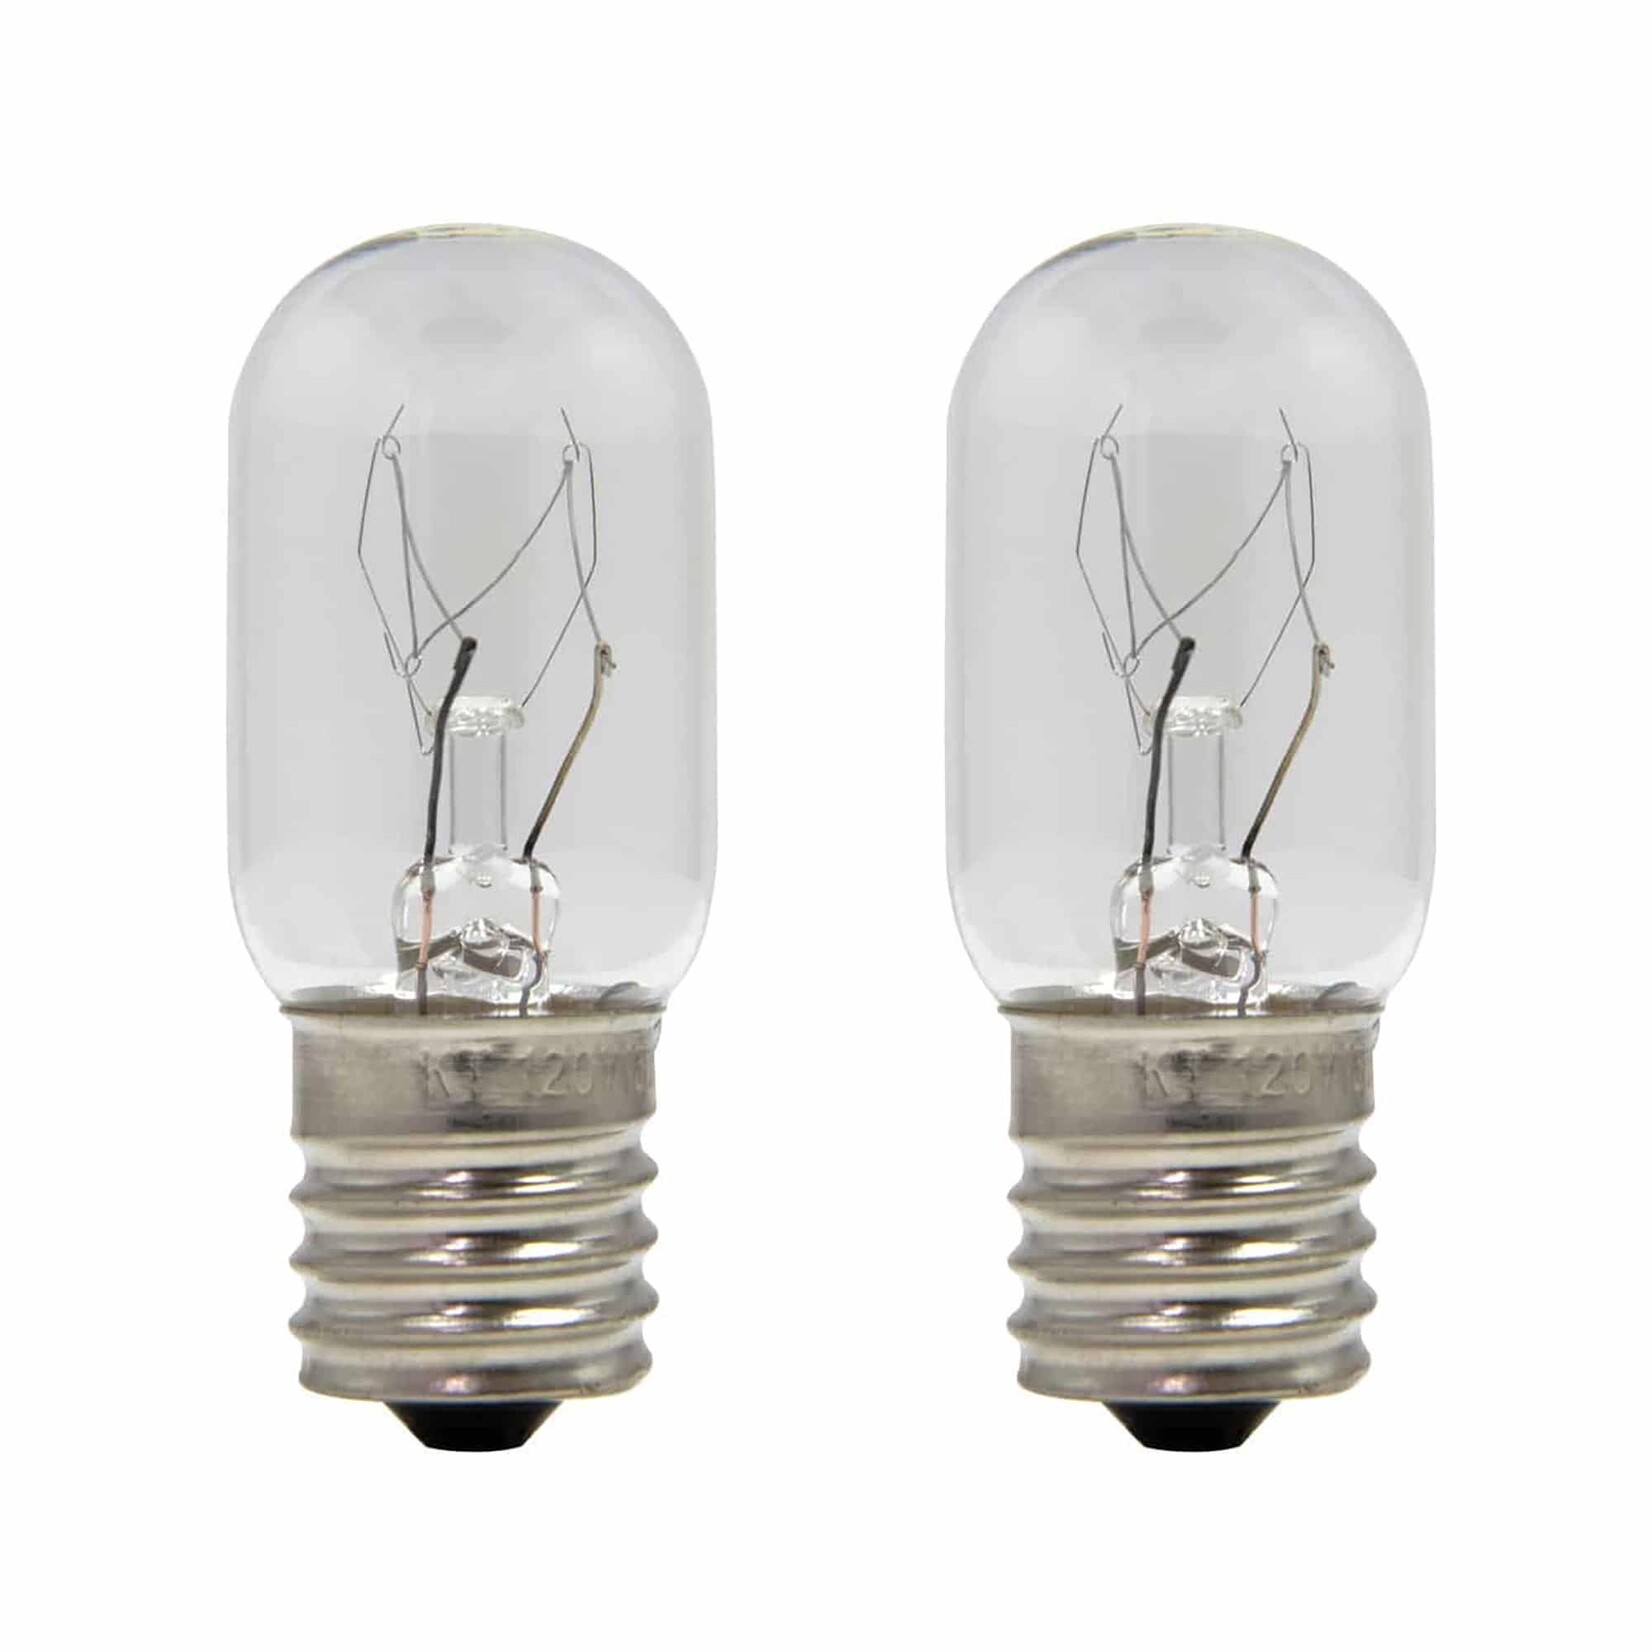 Lava Lamp Replacement Bulb 15w